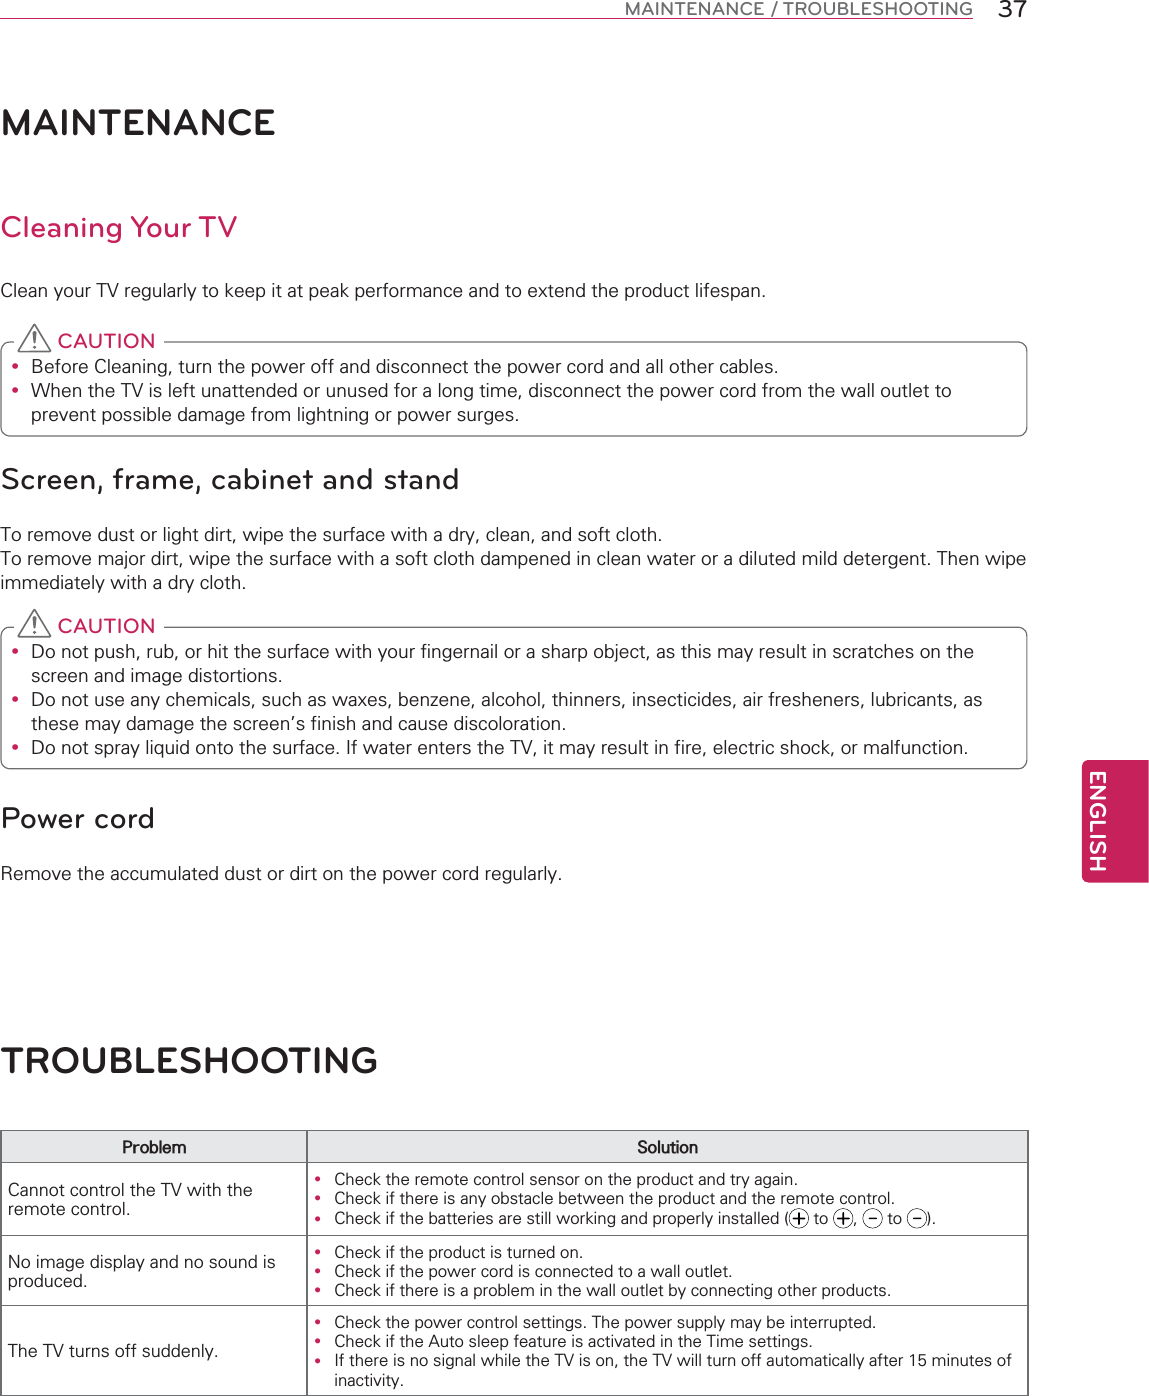 ENGLISH37MAINTENANCE / TROUBLESHOOTINGMAINTENANCECleaning Your TV$18y 2y &lt;$1 CAUTIONScreen, frame, cabinet and stand$$%$y %y 8&quot;y 5$1 CAUTIONPower cord&amp;TROUBLESHOOTING $1y y y      !/y y y $$1y $y $y $1$1@E